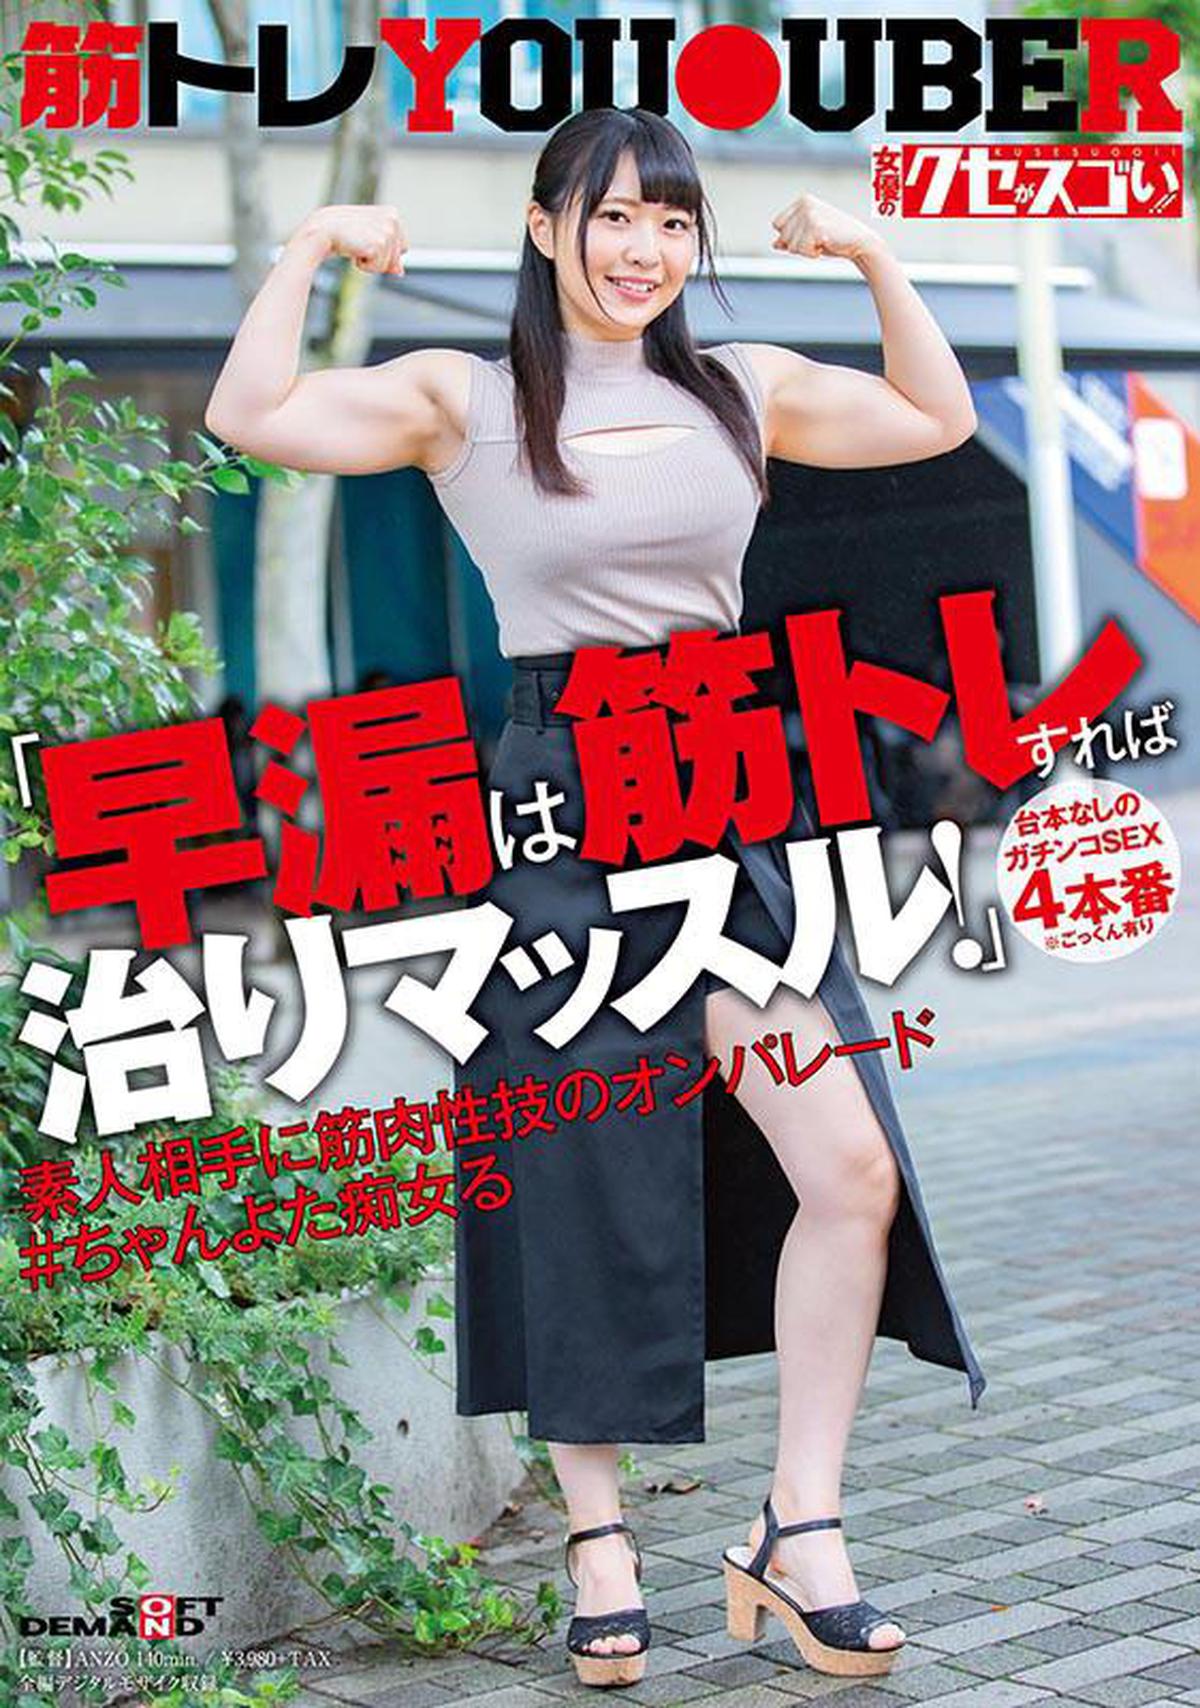 KUSE-005 "Premature Ejaculation Can Be Healed By Muscle Training!" Gachinko SEX 4 Production Without Script * Cum Swallowing On Parade of Muscle Techniques Against Amateurs # Chanyota Slut